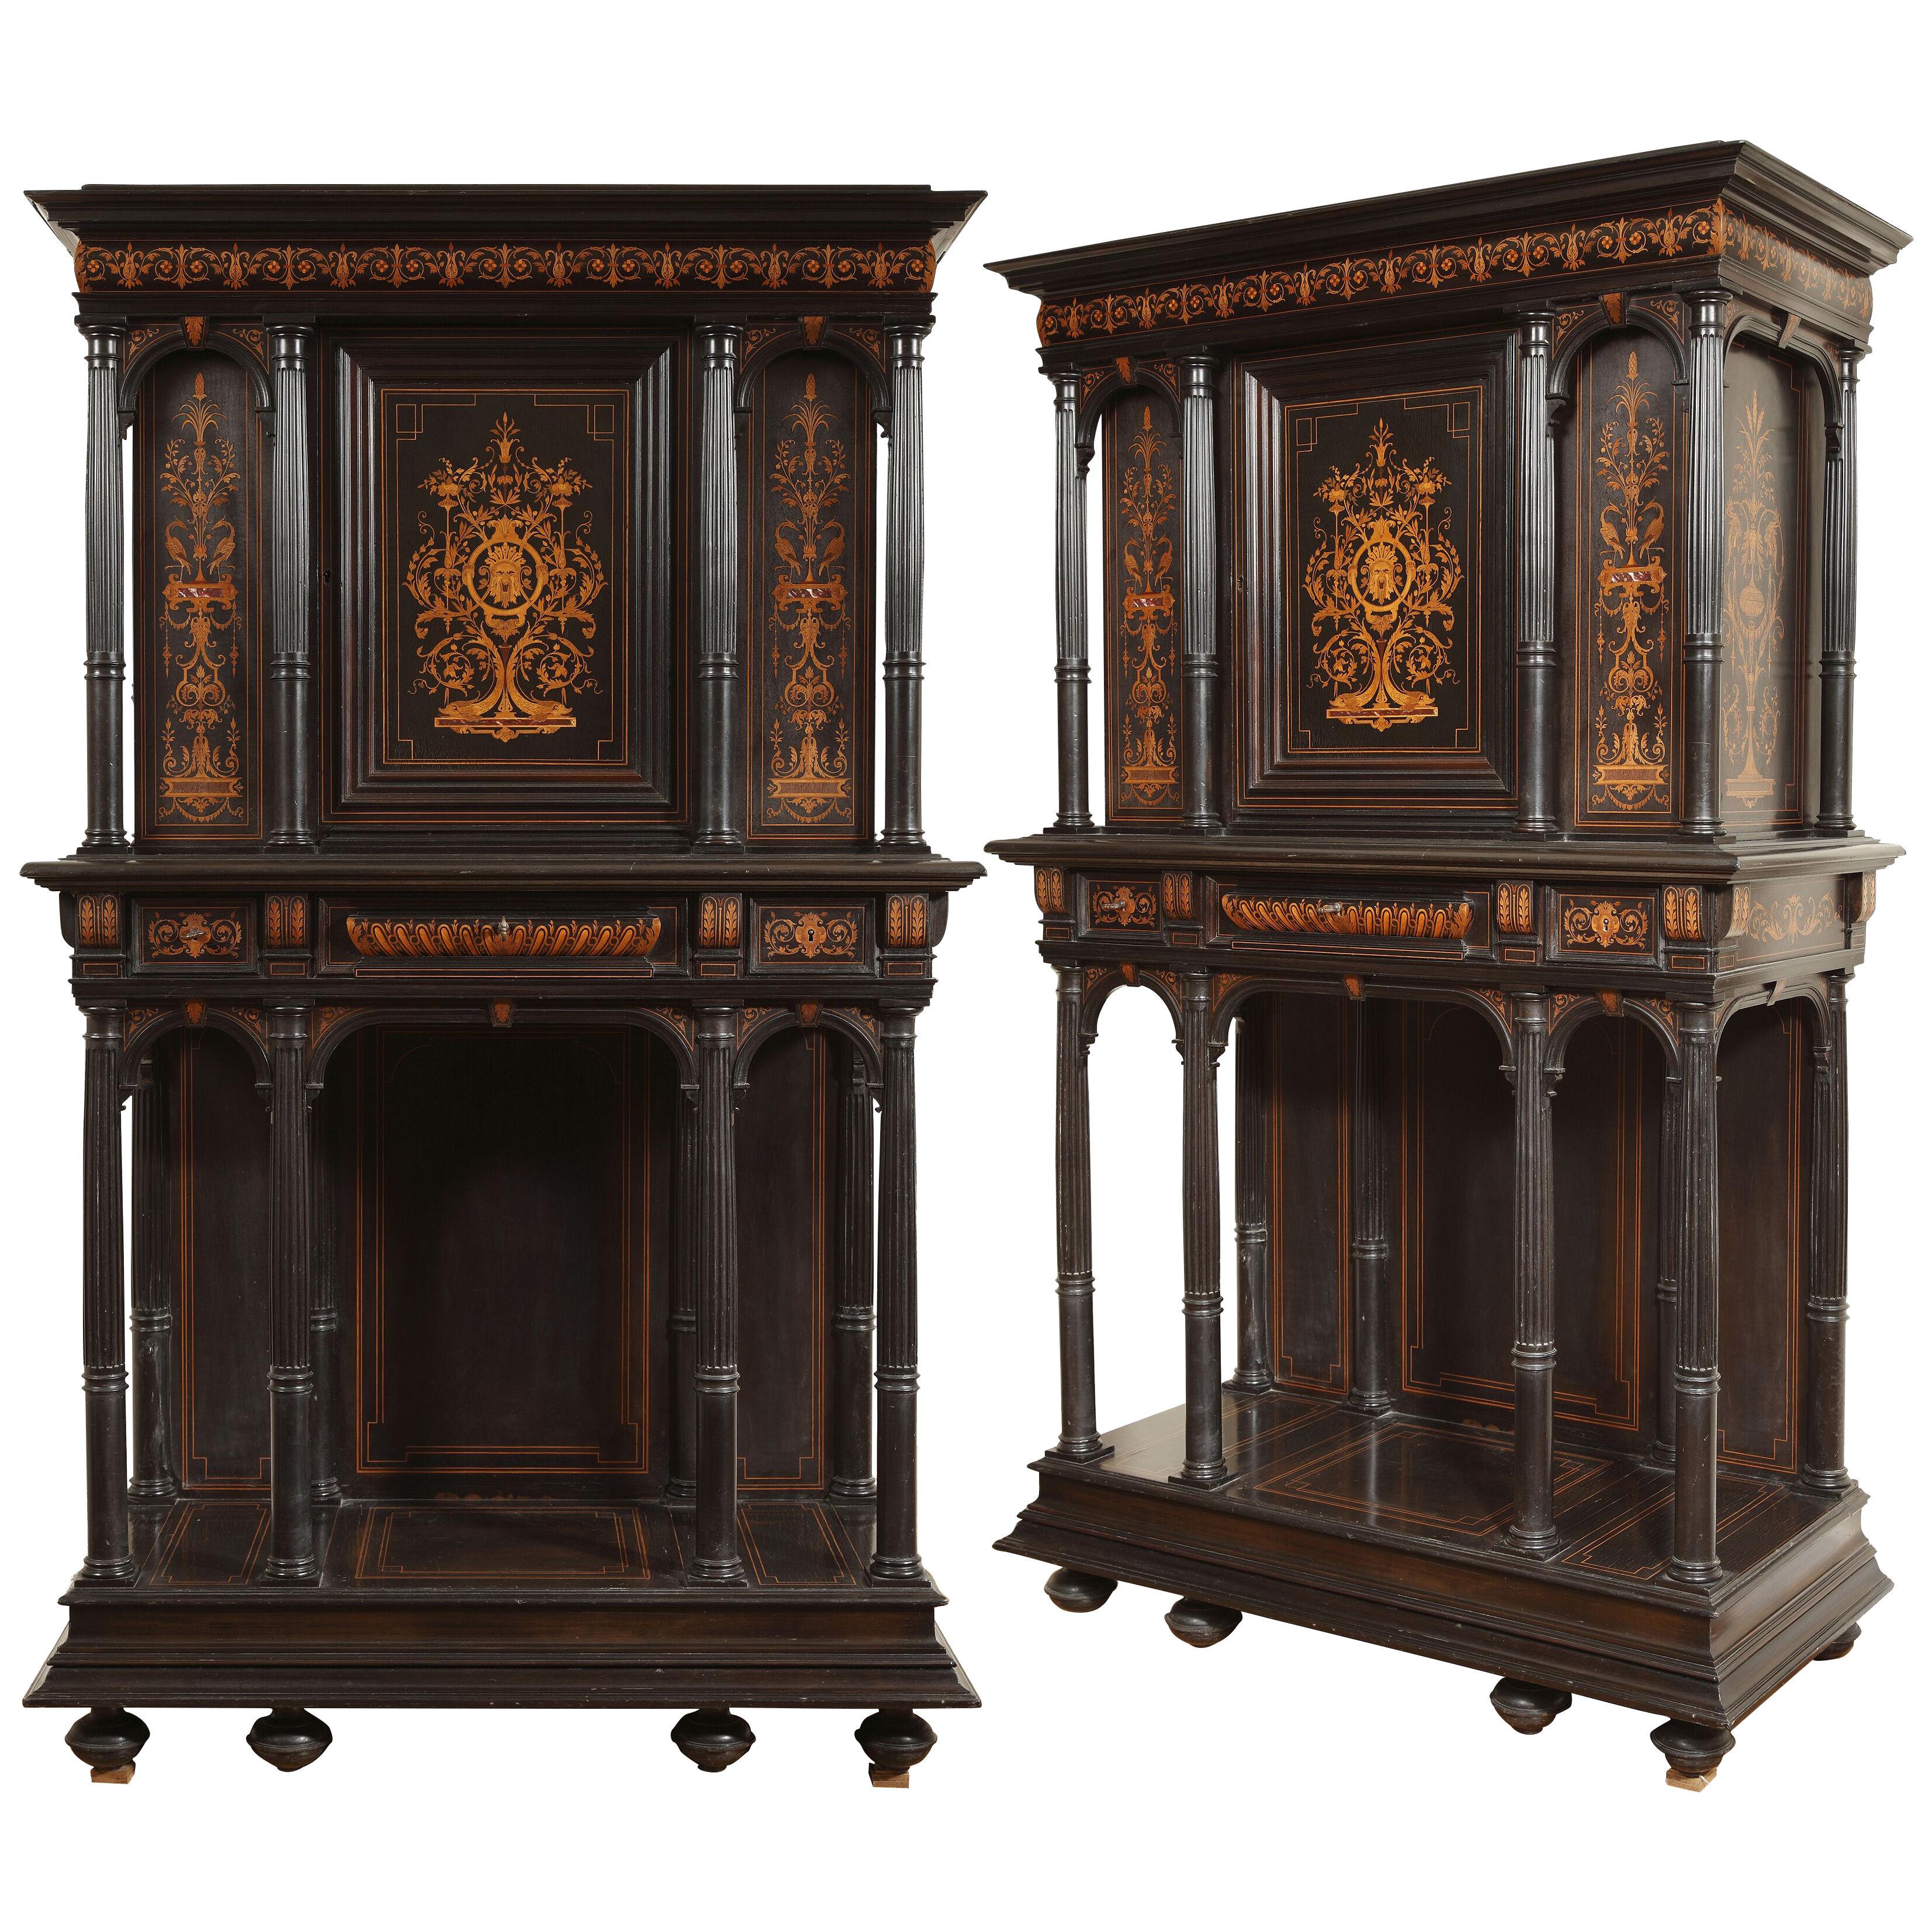 Rare Pair of Renaissance Revival Cabinet Attributed to F. Linke, France, c. 1880